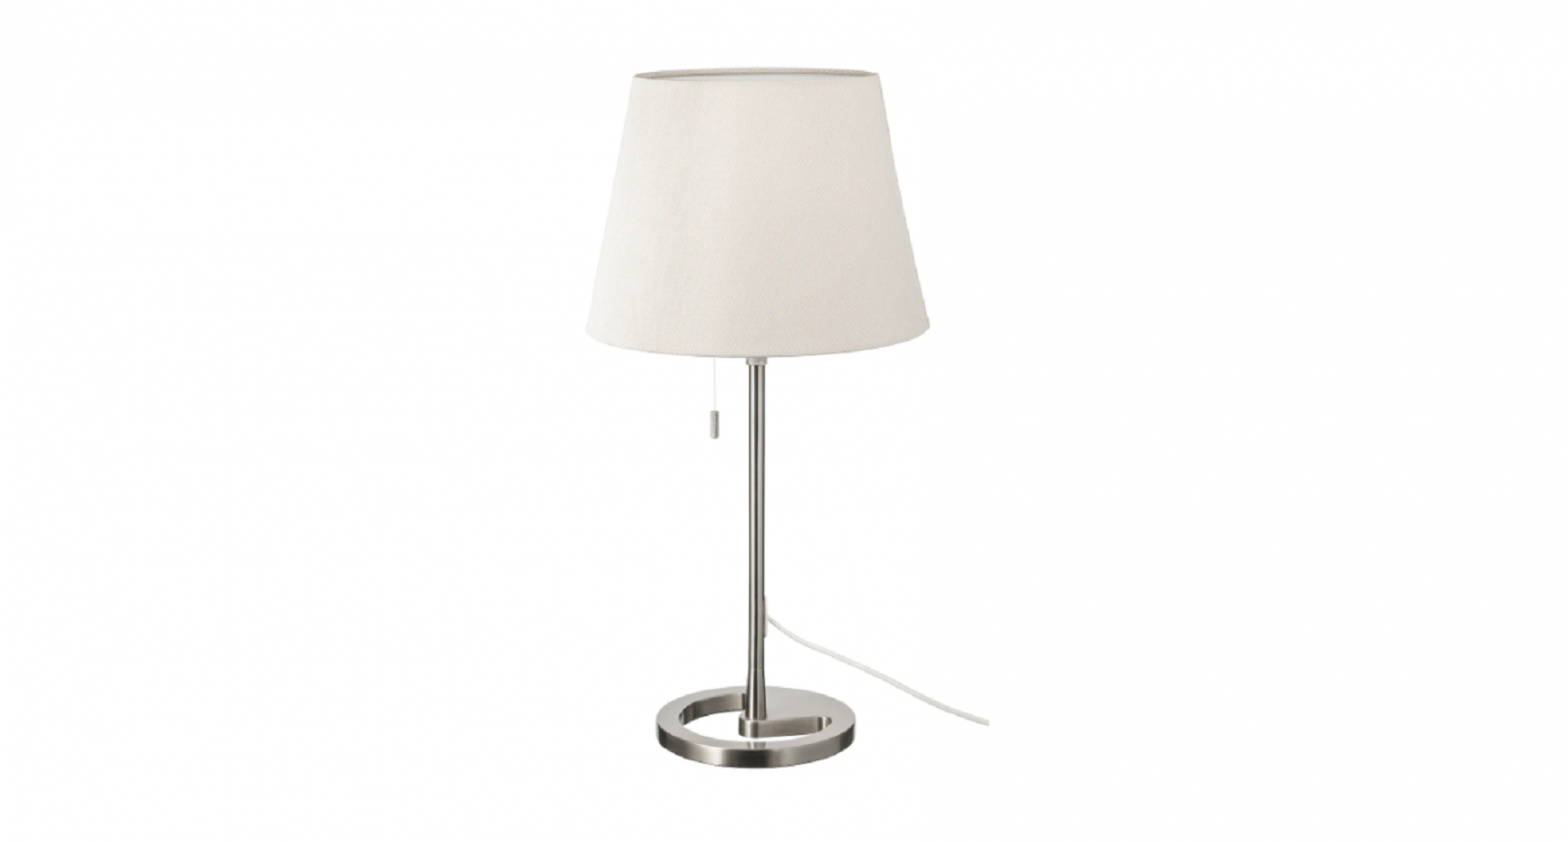 IKEA NYFORS Table Lamp Installation Guide